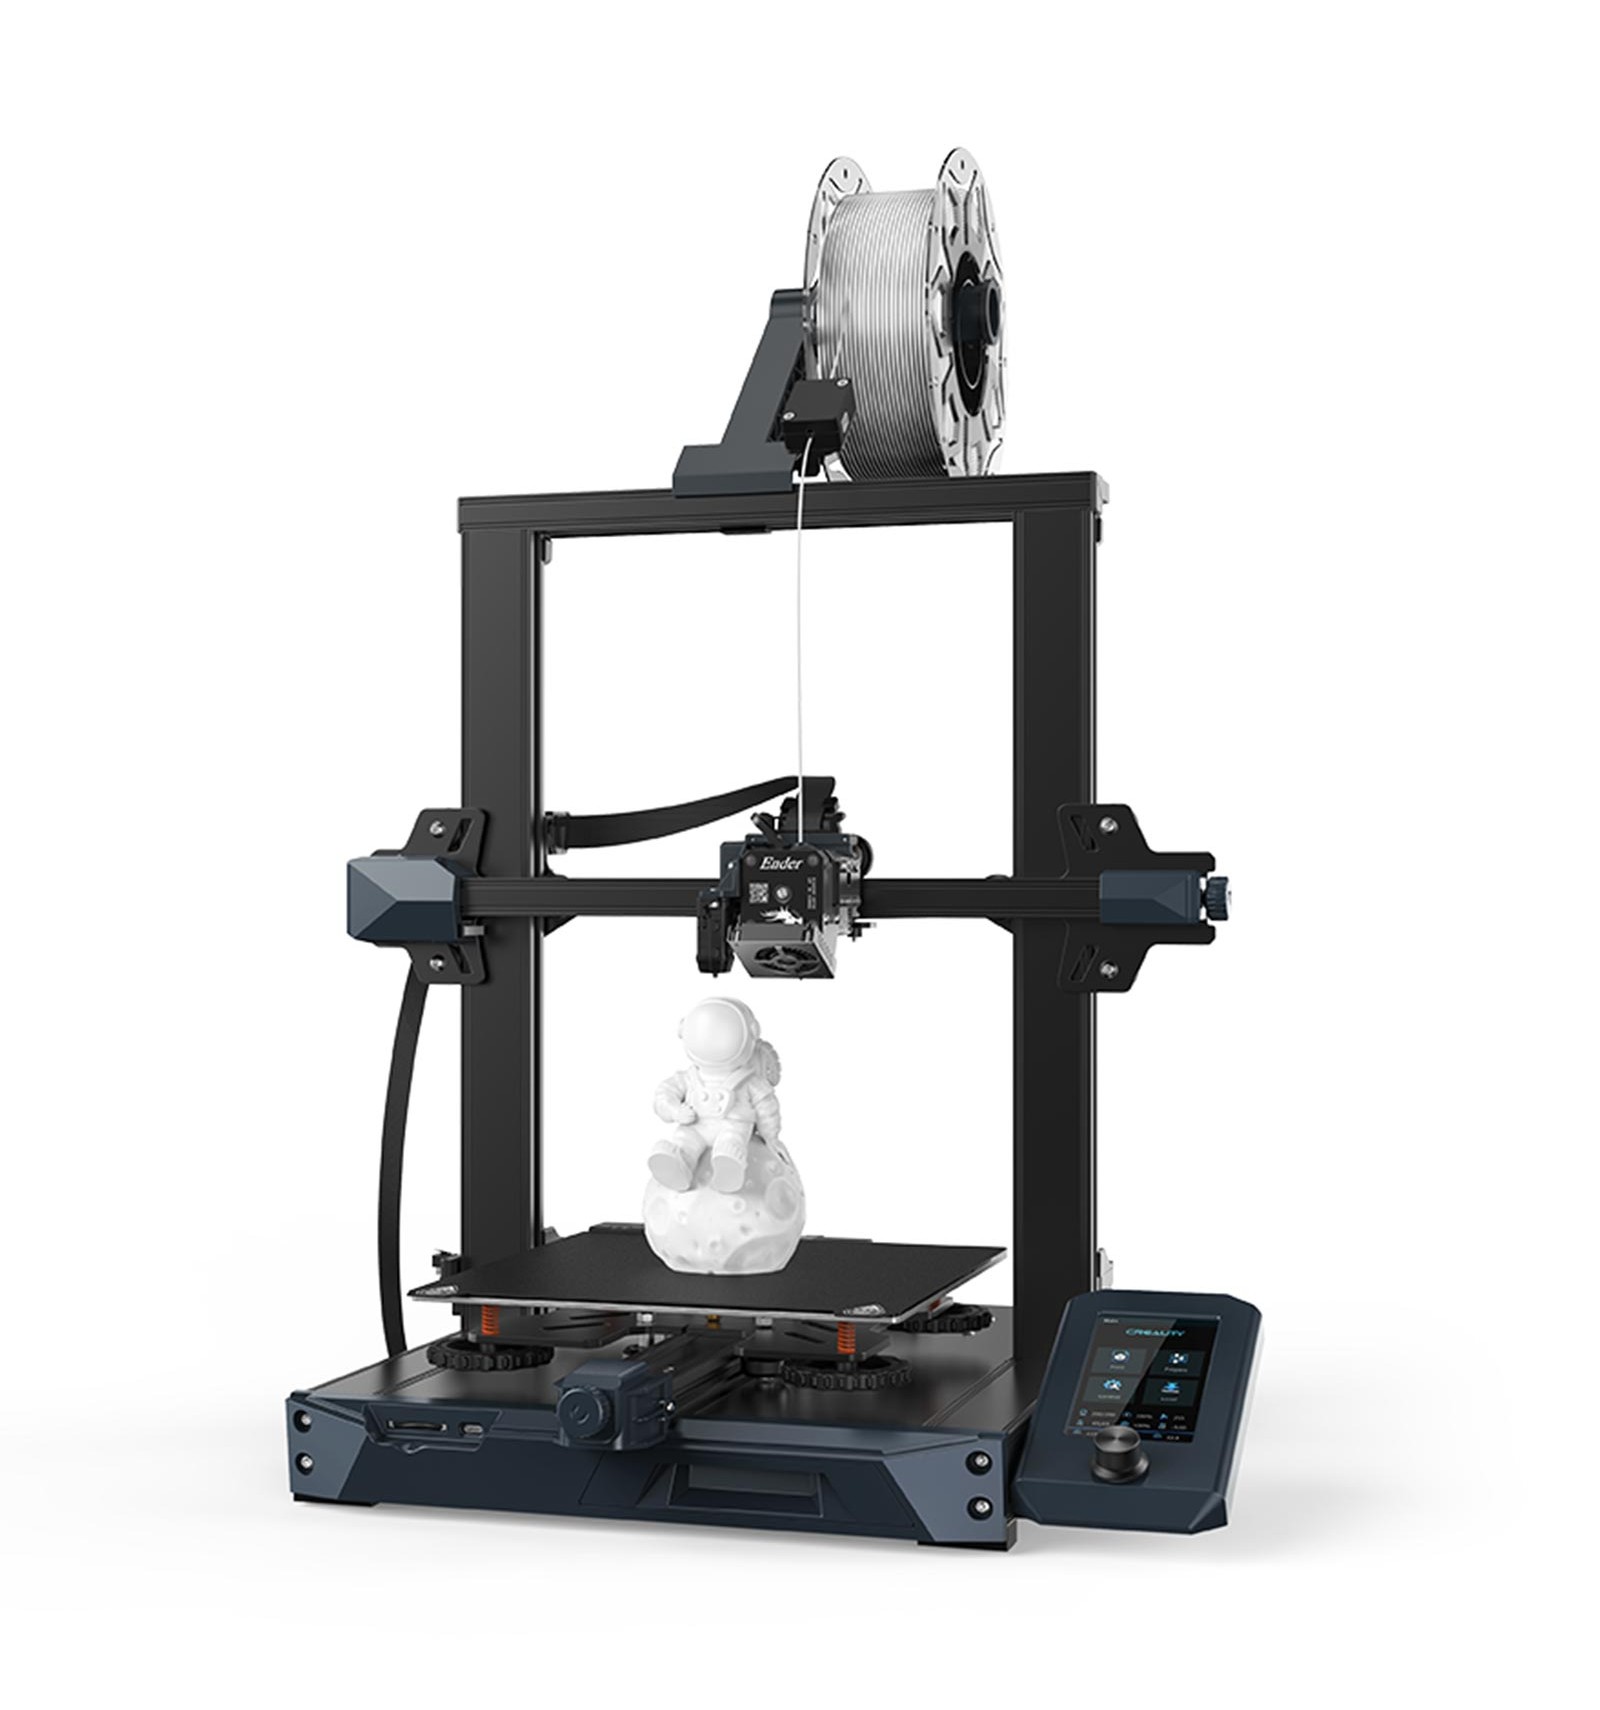 Ender 3 Creality 3D 3D printer: Price, Features, Videos…